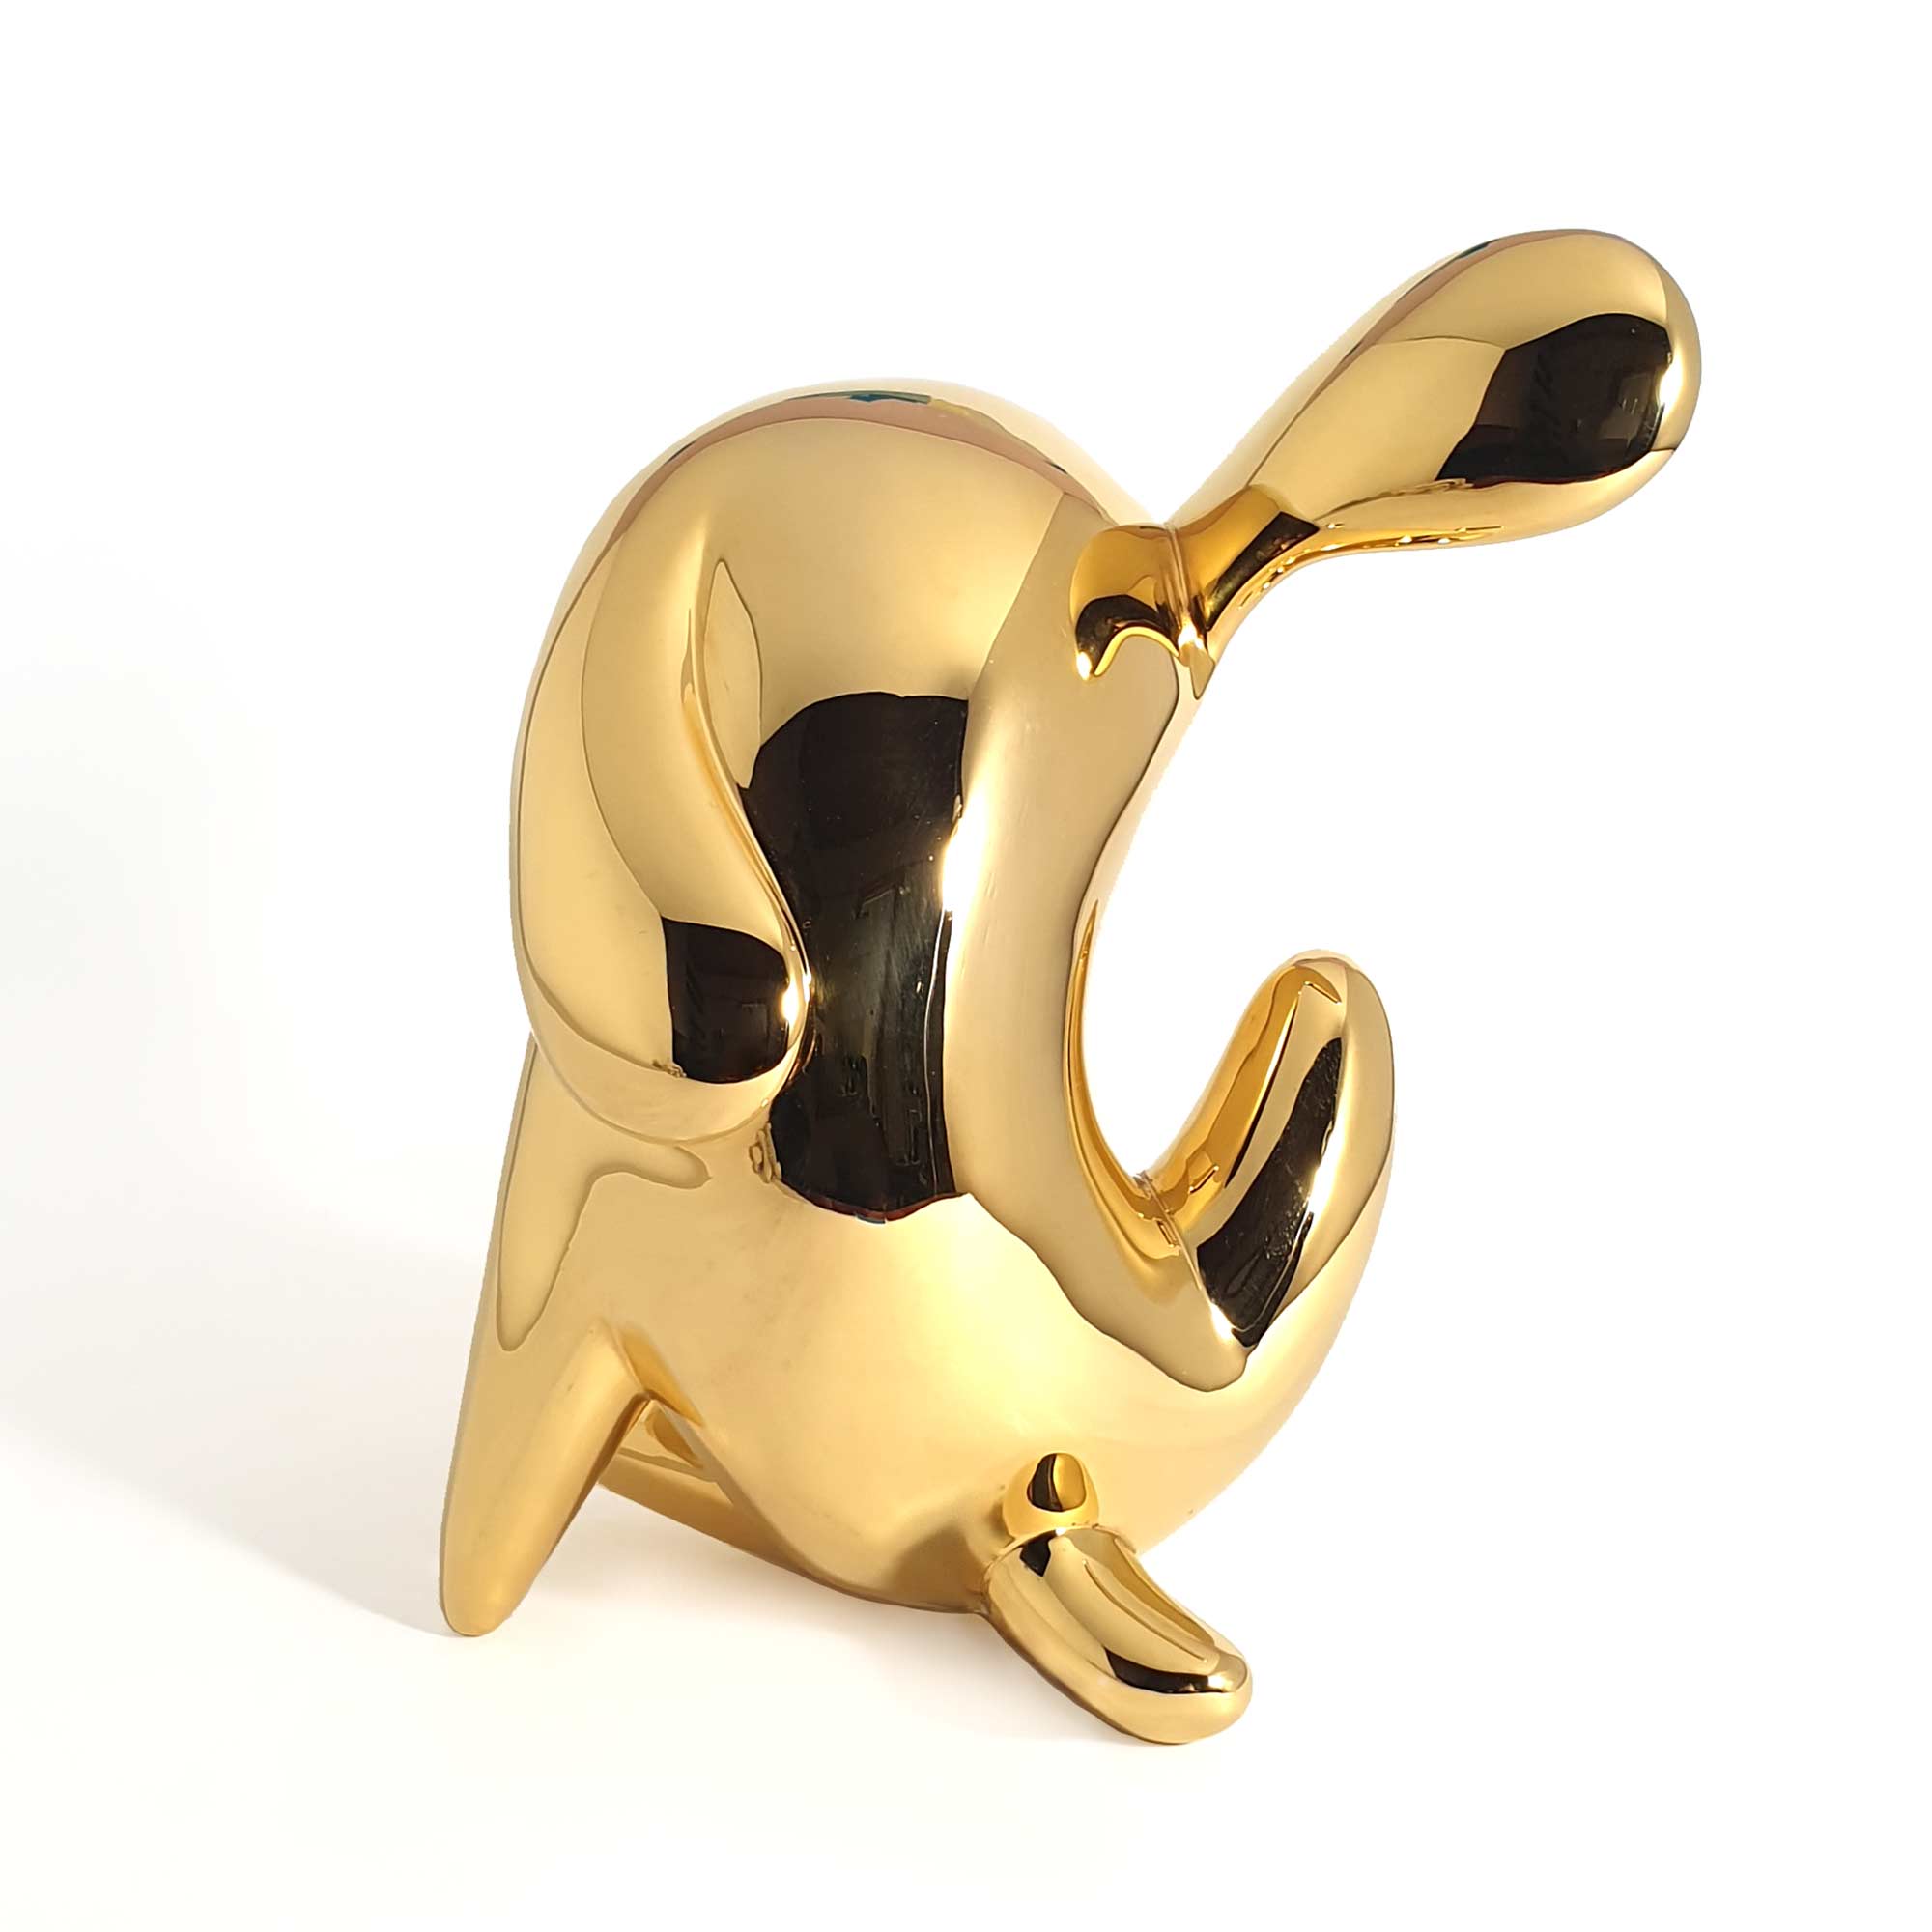 The itch, dog sculpture, Gold Mirror Polished Stainless Steel Sculpture, by artist Ferdi B Dick, back view 